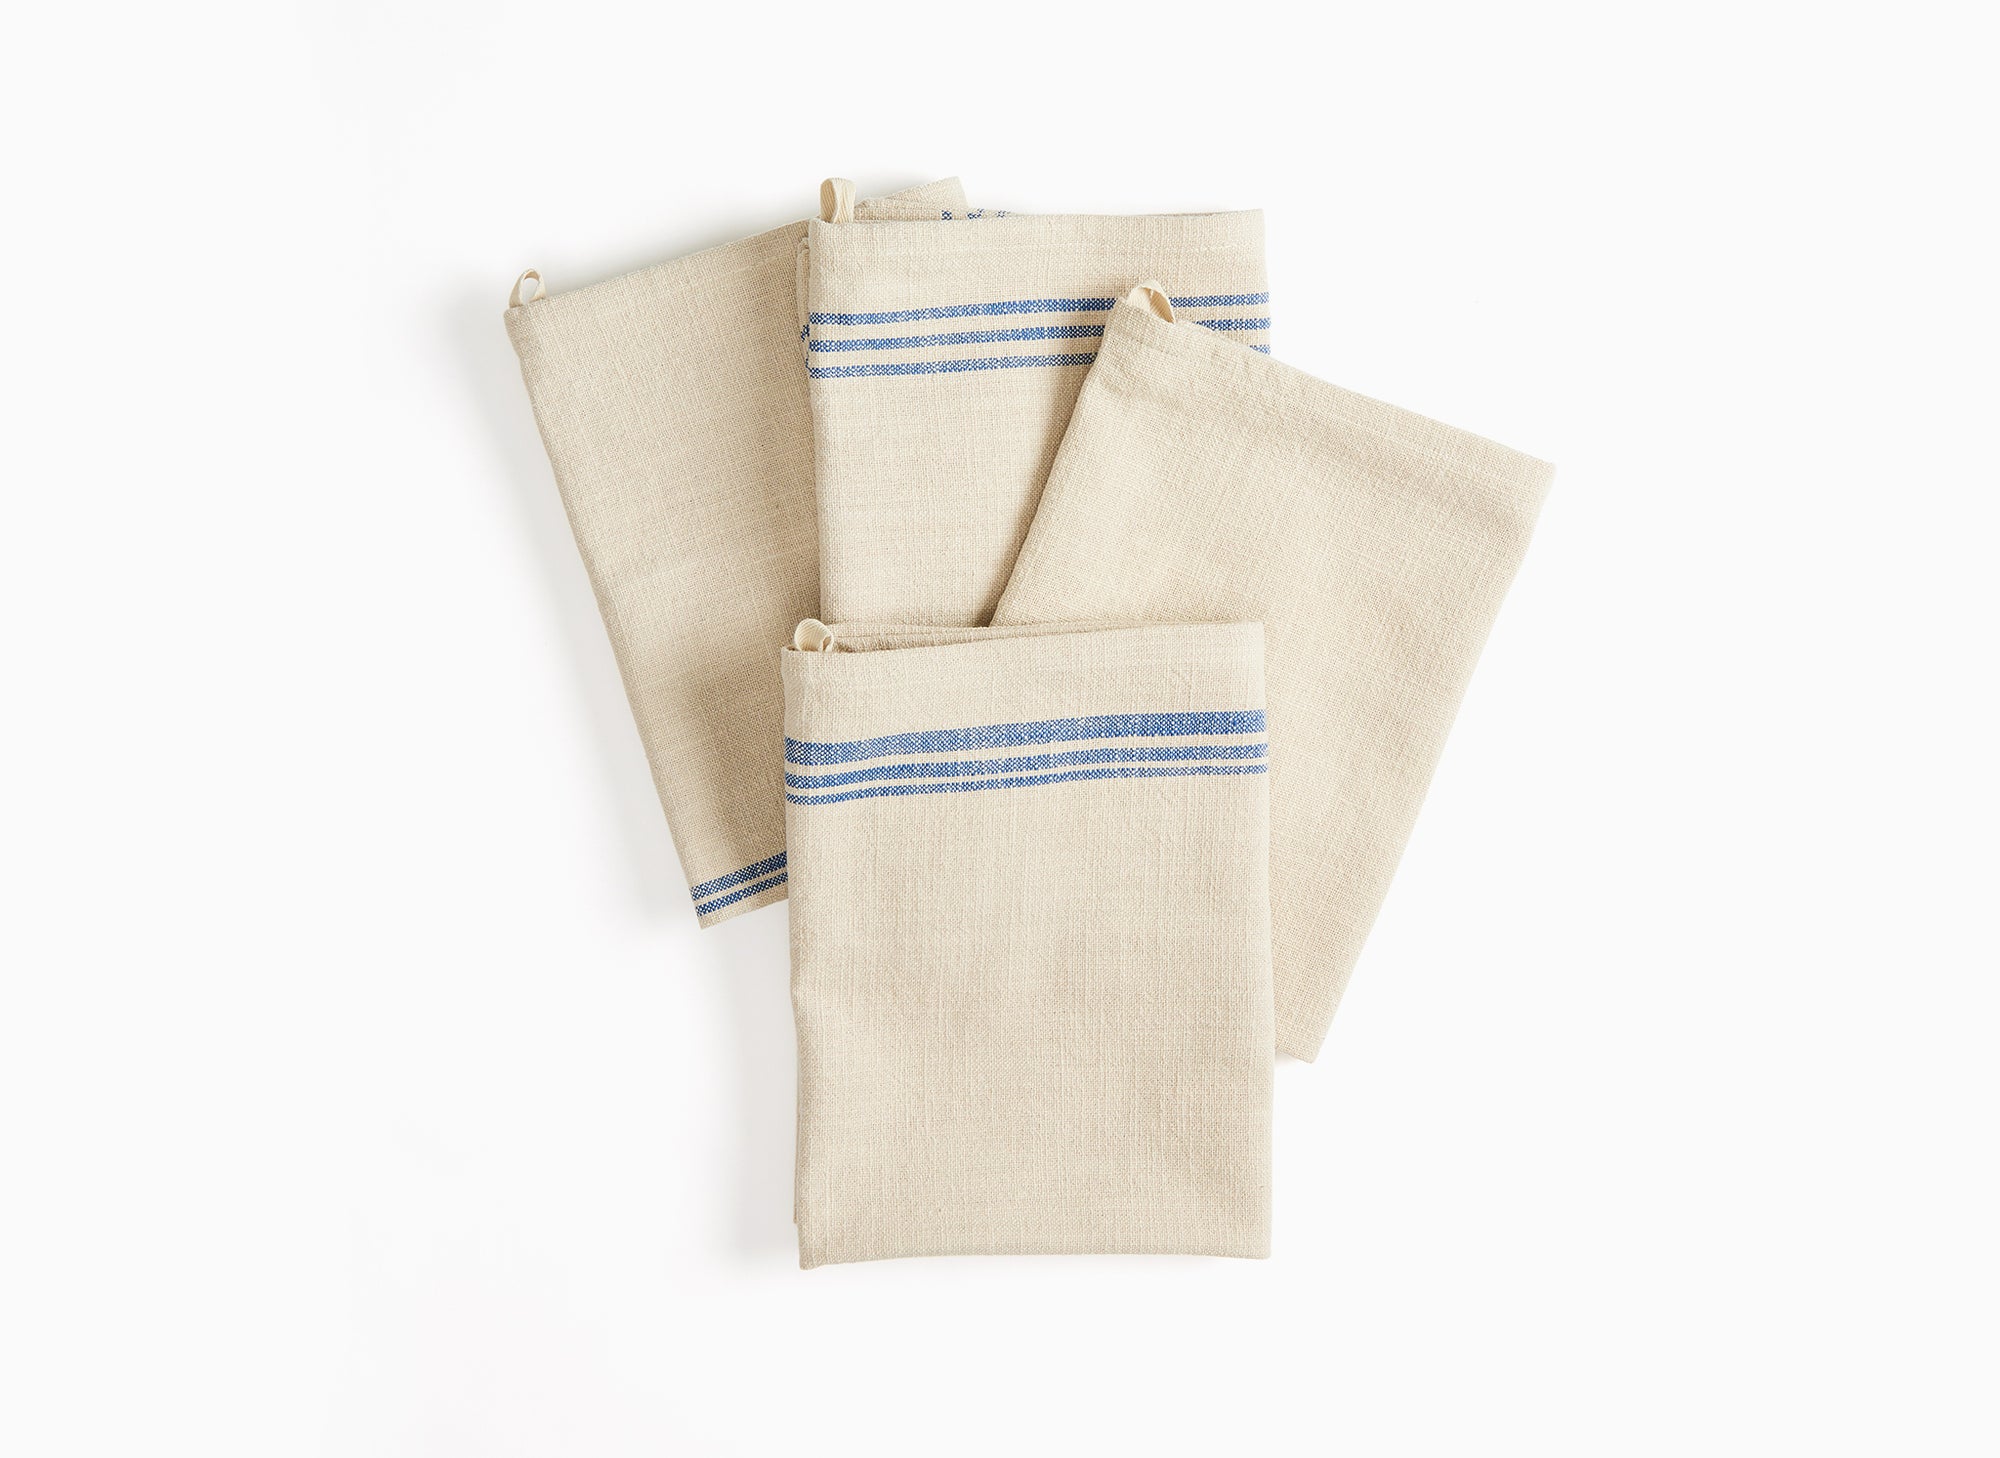 Four folded Misen Towels lie stacked on each other and slightly fanned out on a white background.